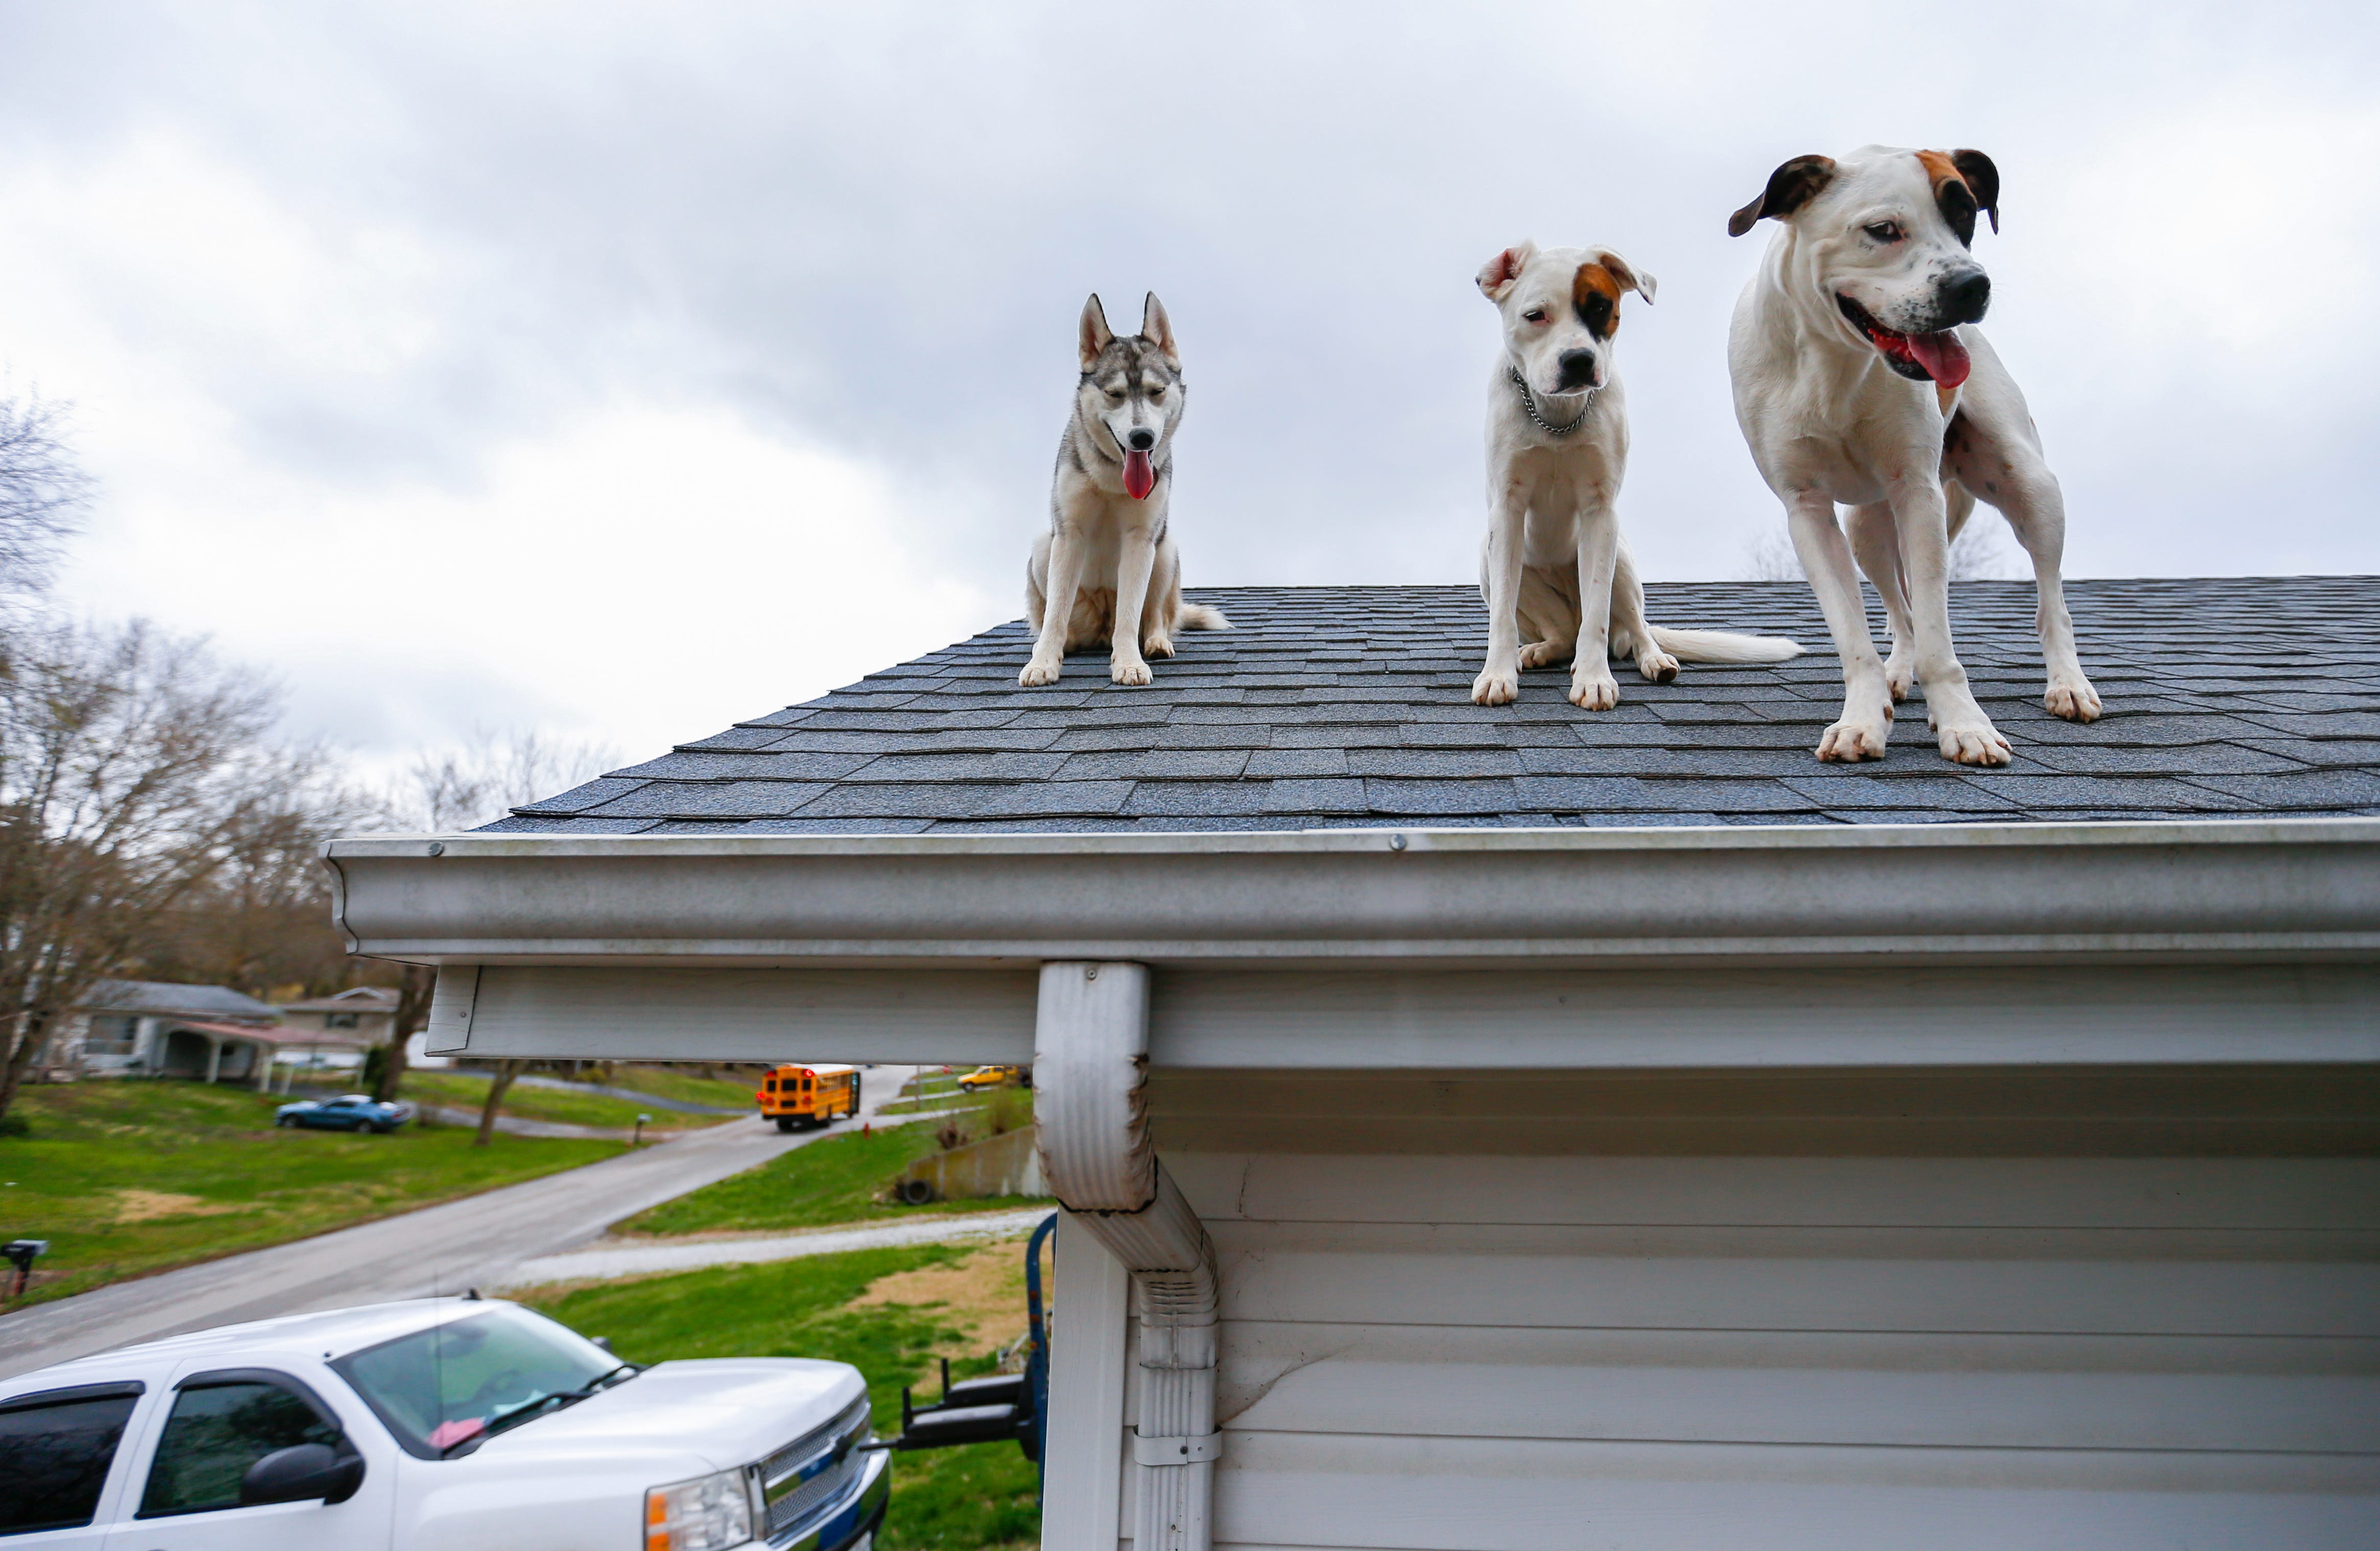 Why are there four dogs on the roof of this Ozark house?